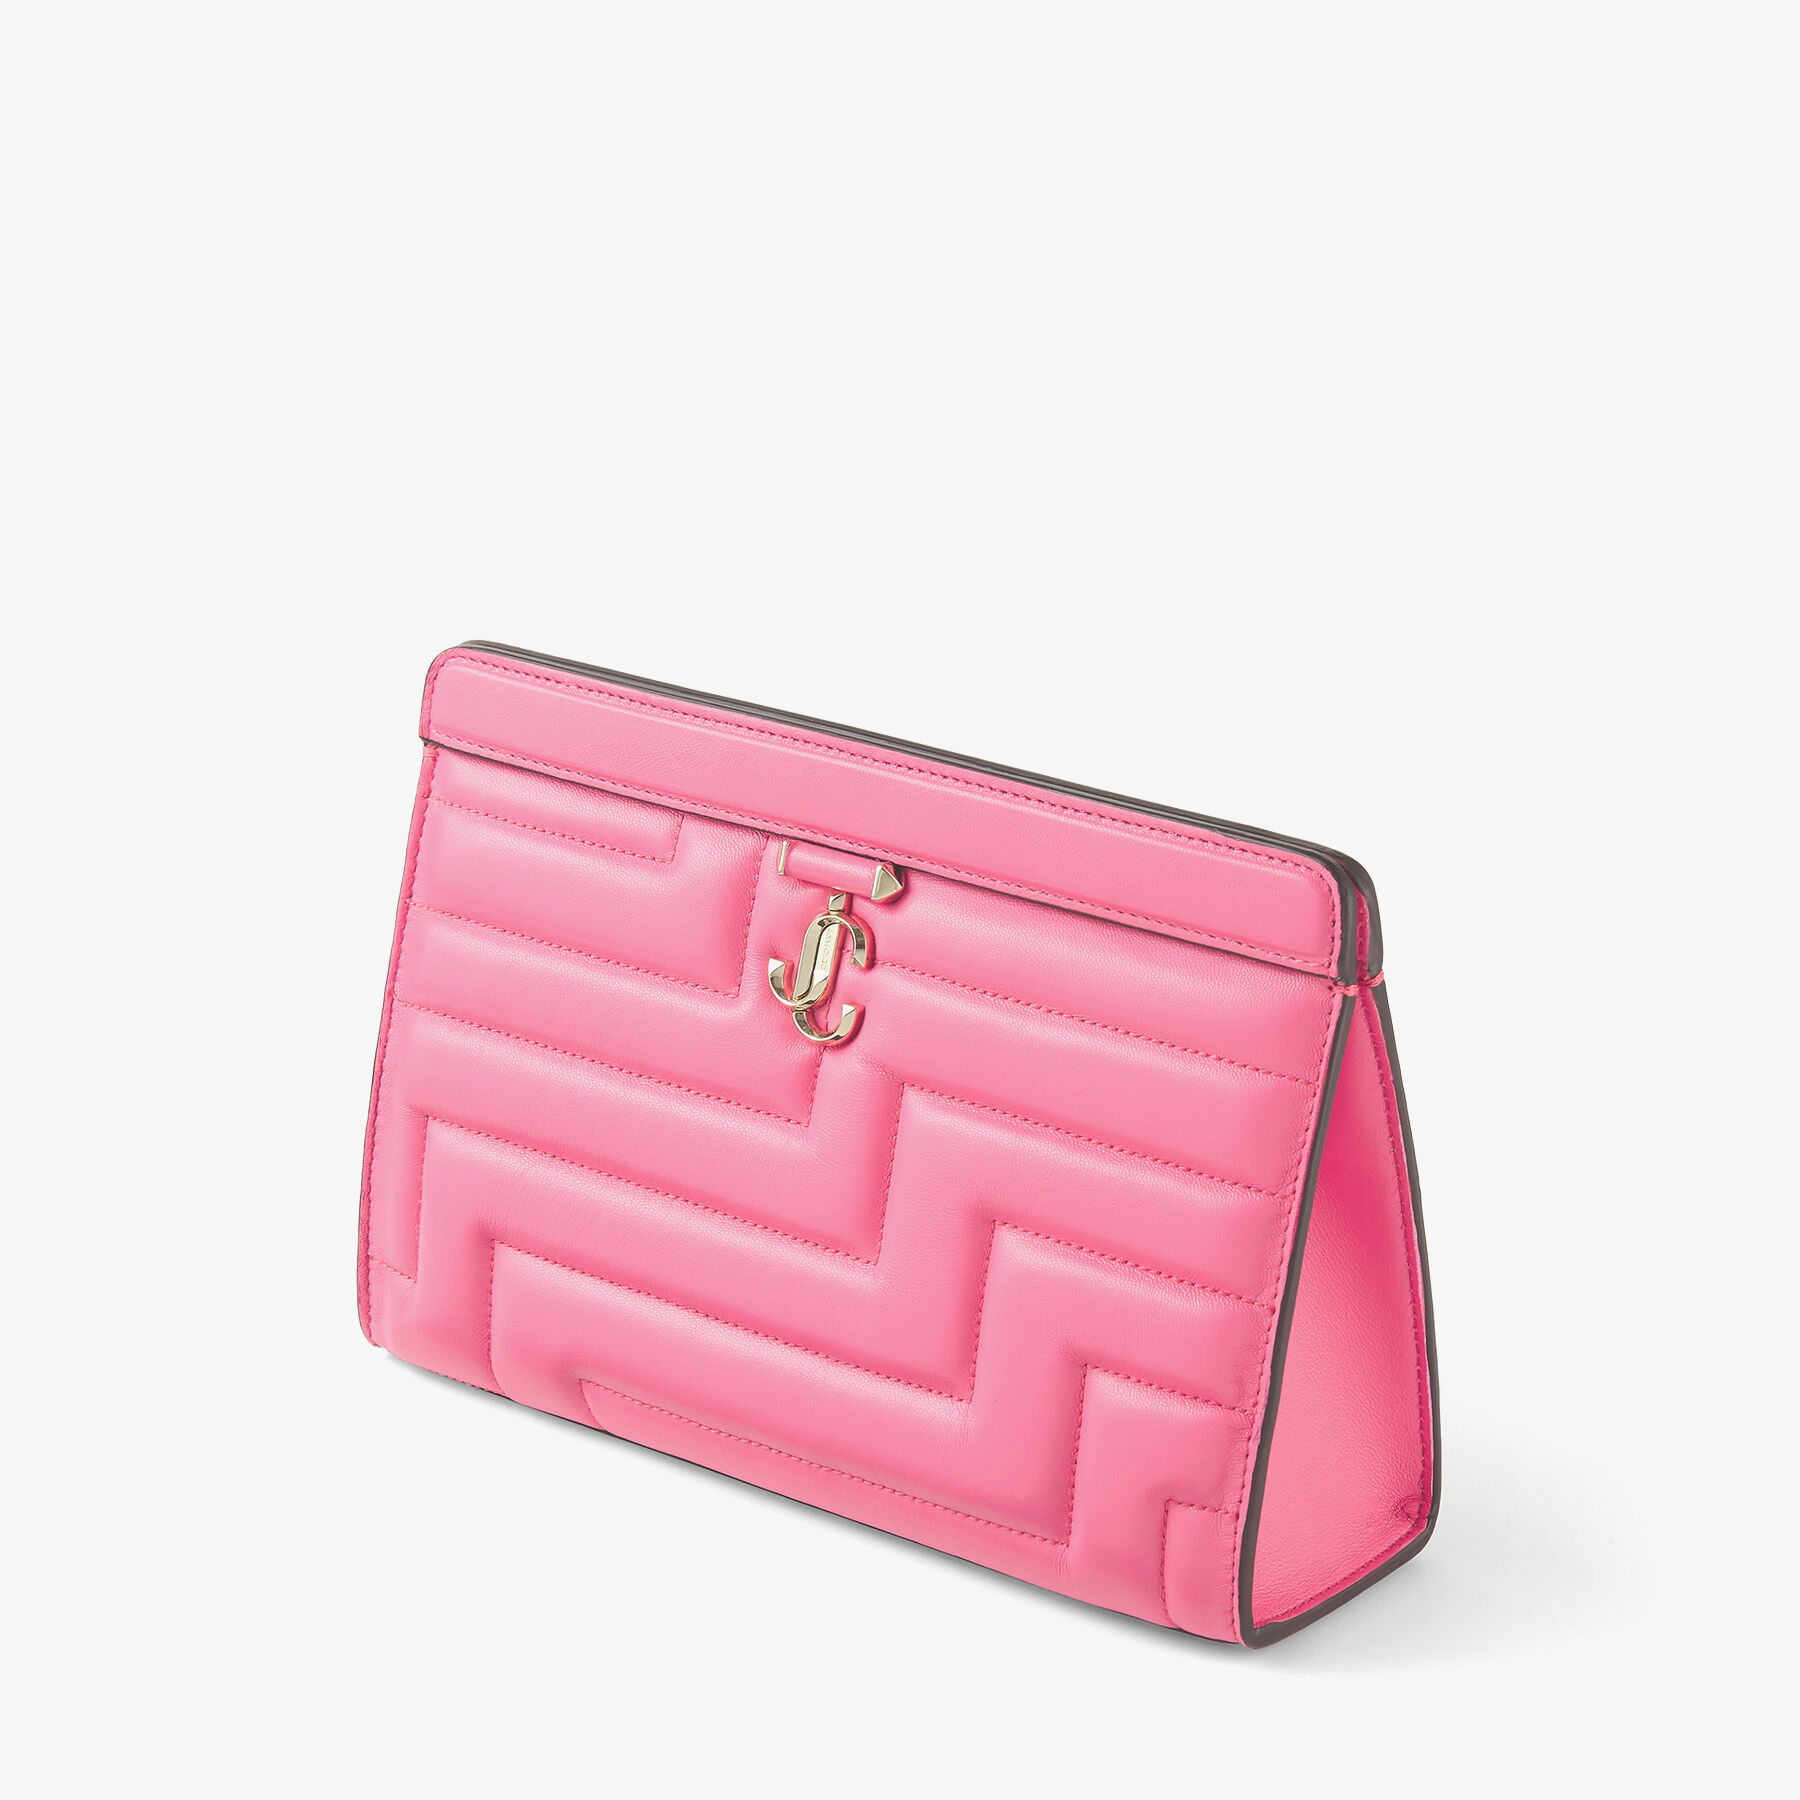 Candy Pink Quilted Nappa Leather Pouch Bag with Light Gold JC